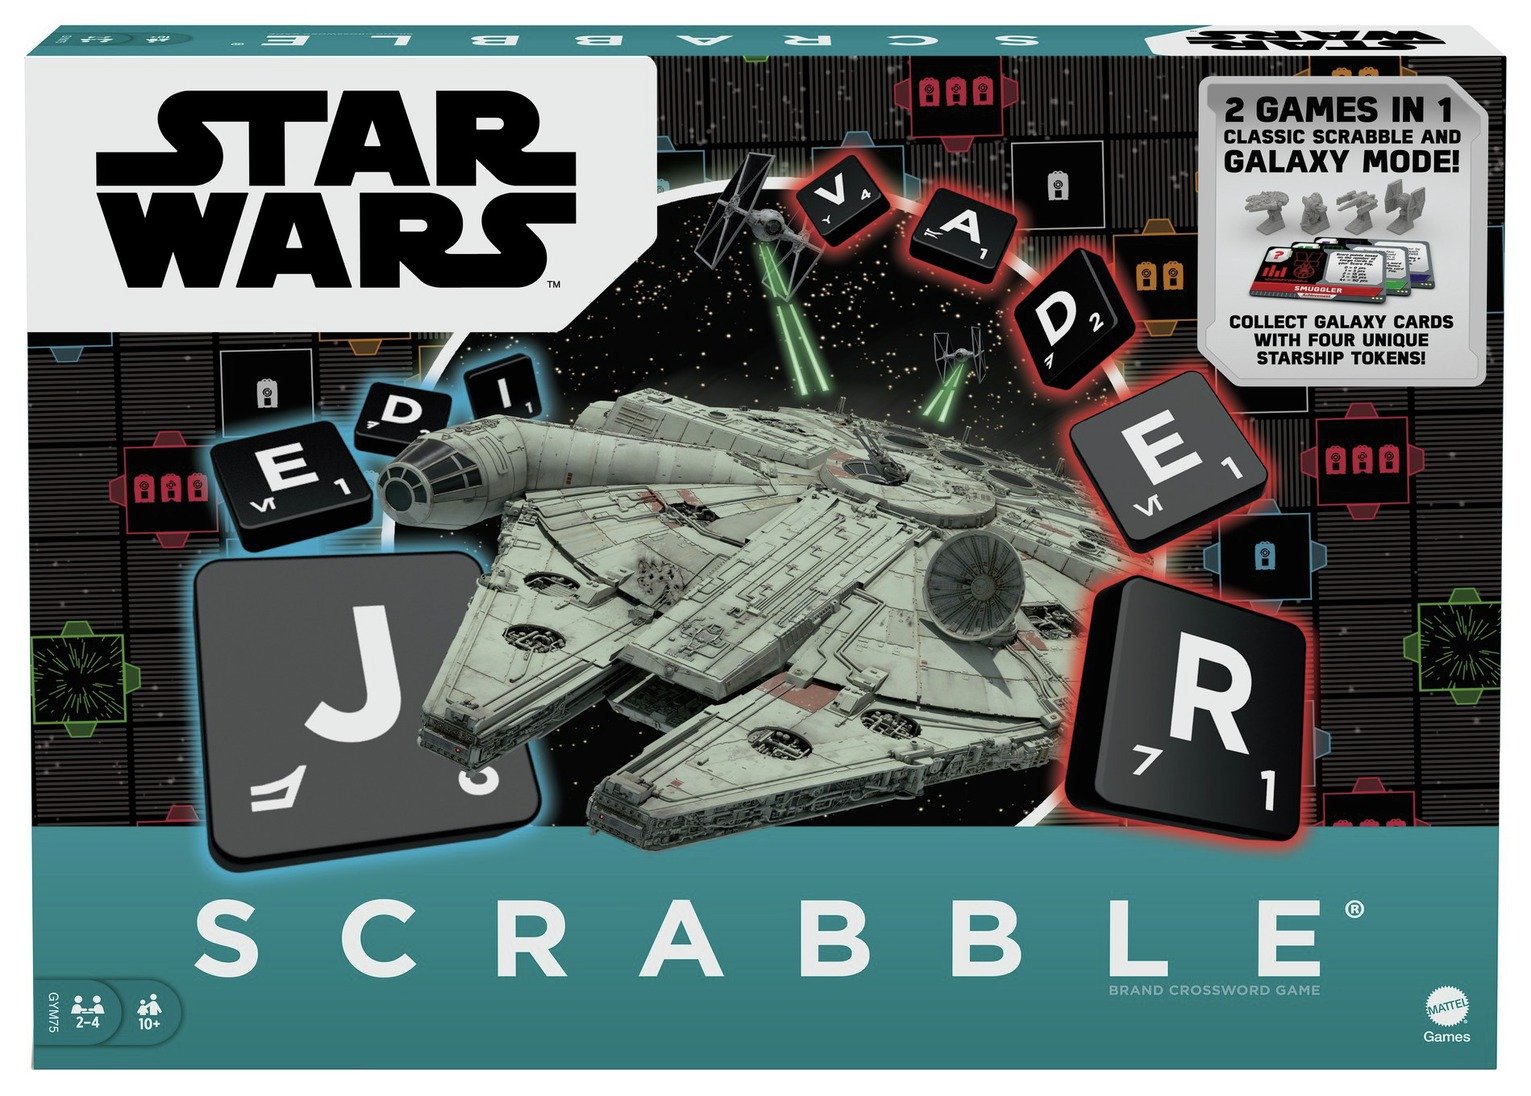 Scrabble Star Wars Board Game review